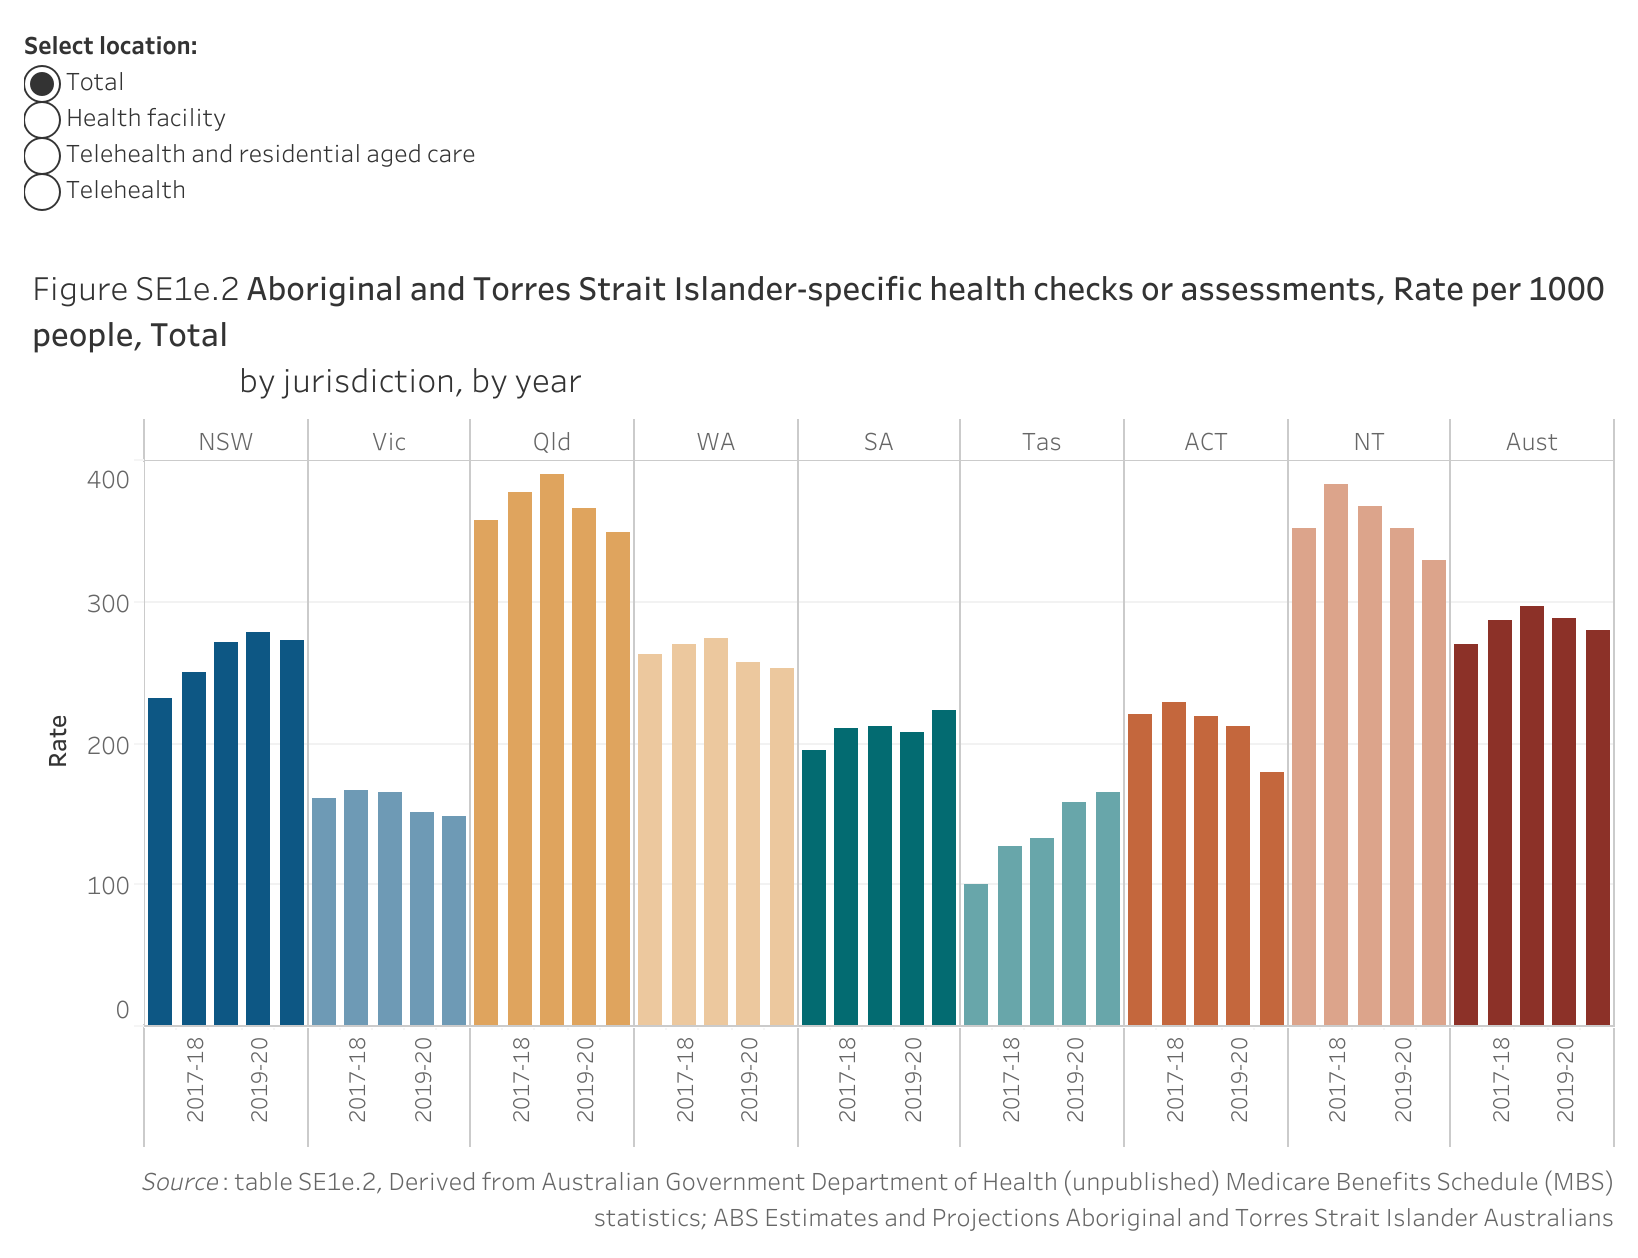 Figure SE1e.2. Bar chart showing the rate of Aboriginal and Torres Strait Islander-specific health checks or assessments completed per 1000 people , by jurisdiction and by year. Data table of figure SE1e.2 is below.